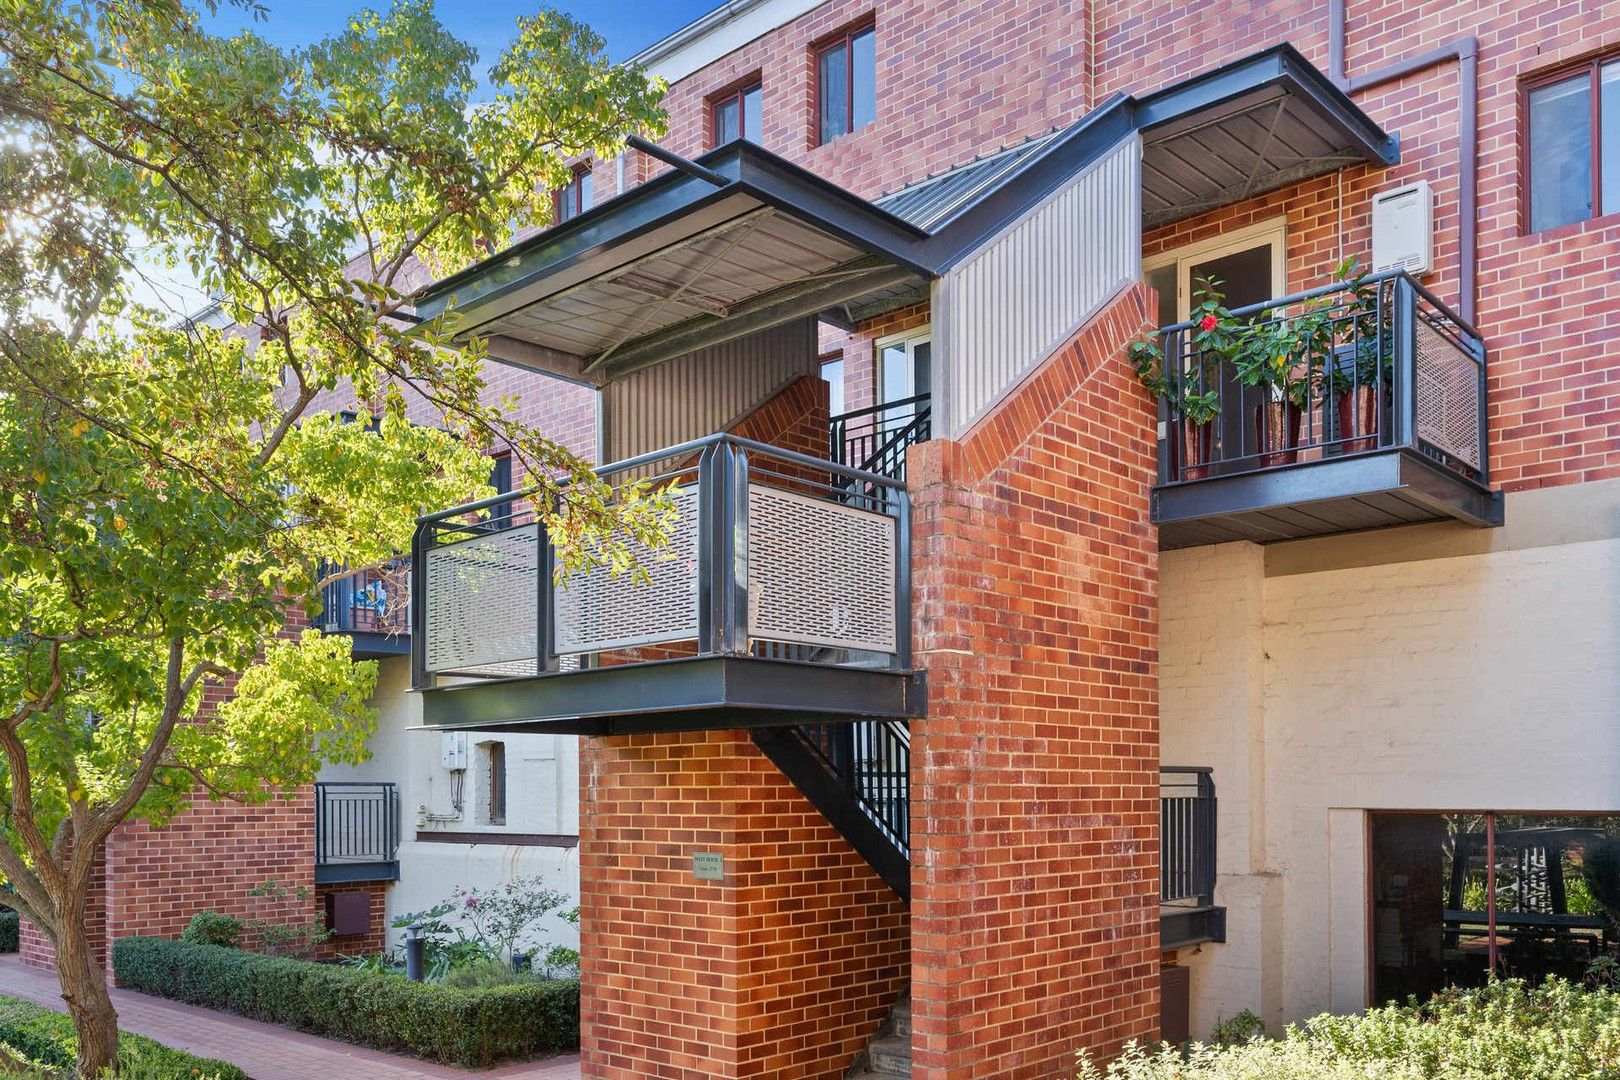 2 bedrooms Townhouse in 18/65 Palmerston Street PERTH WA, 6000